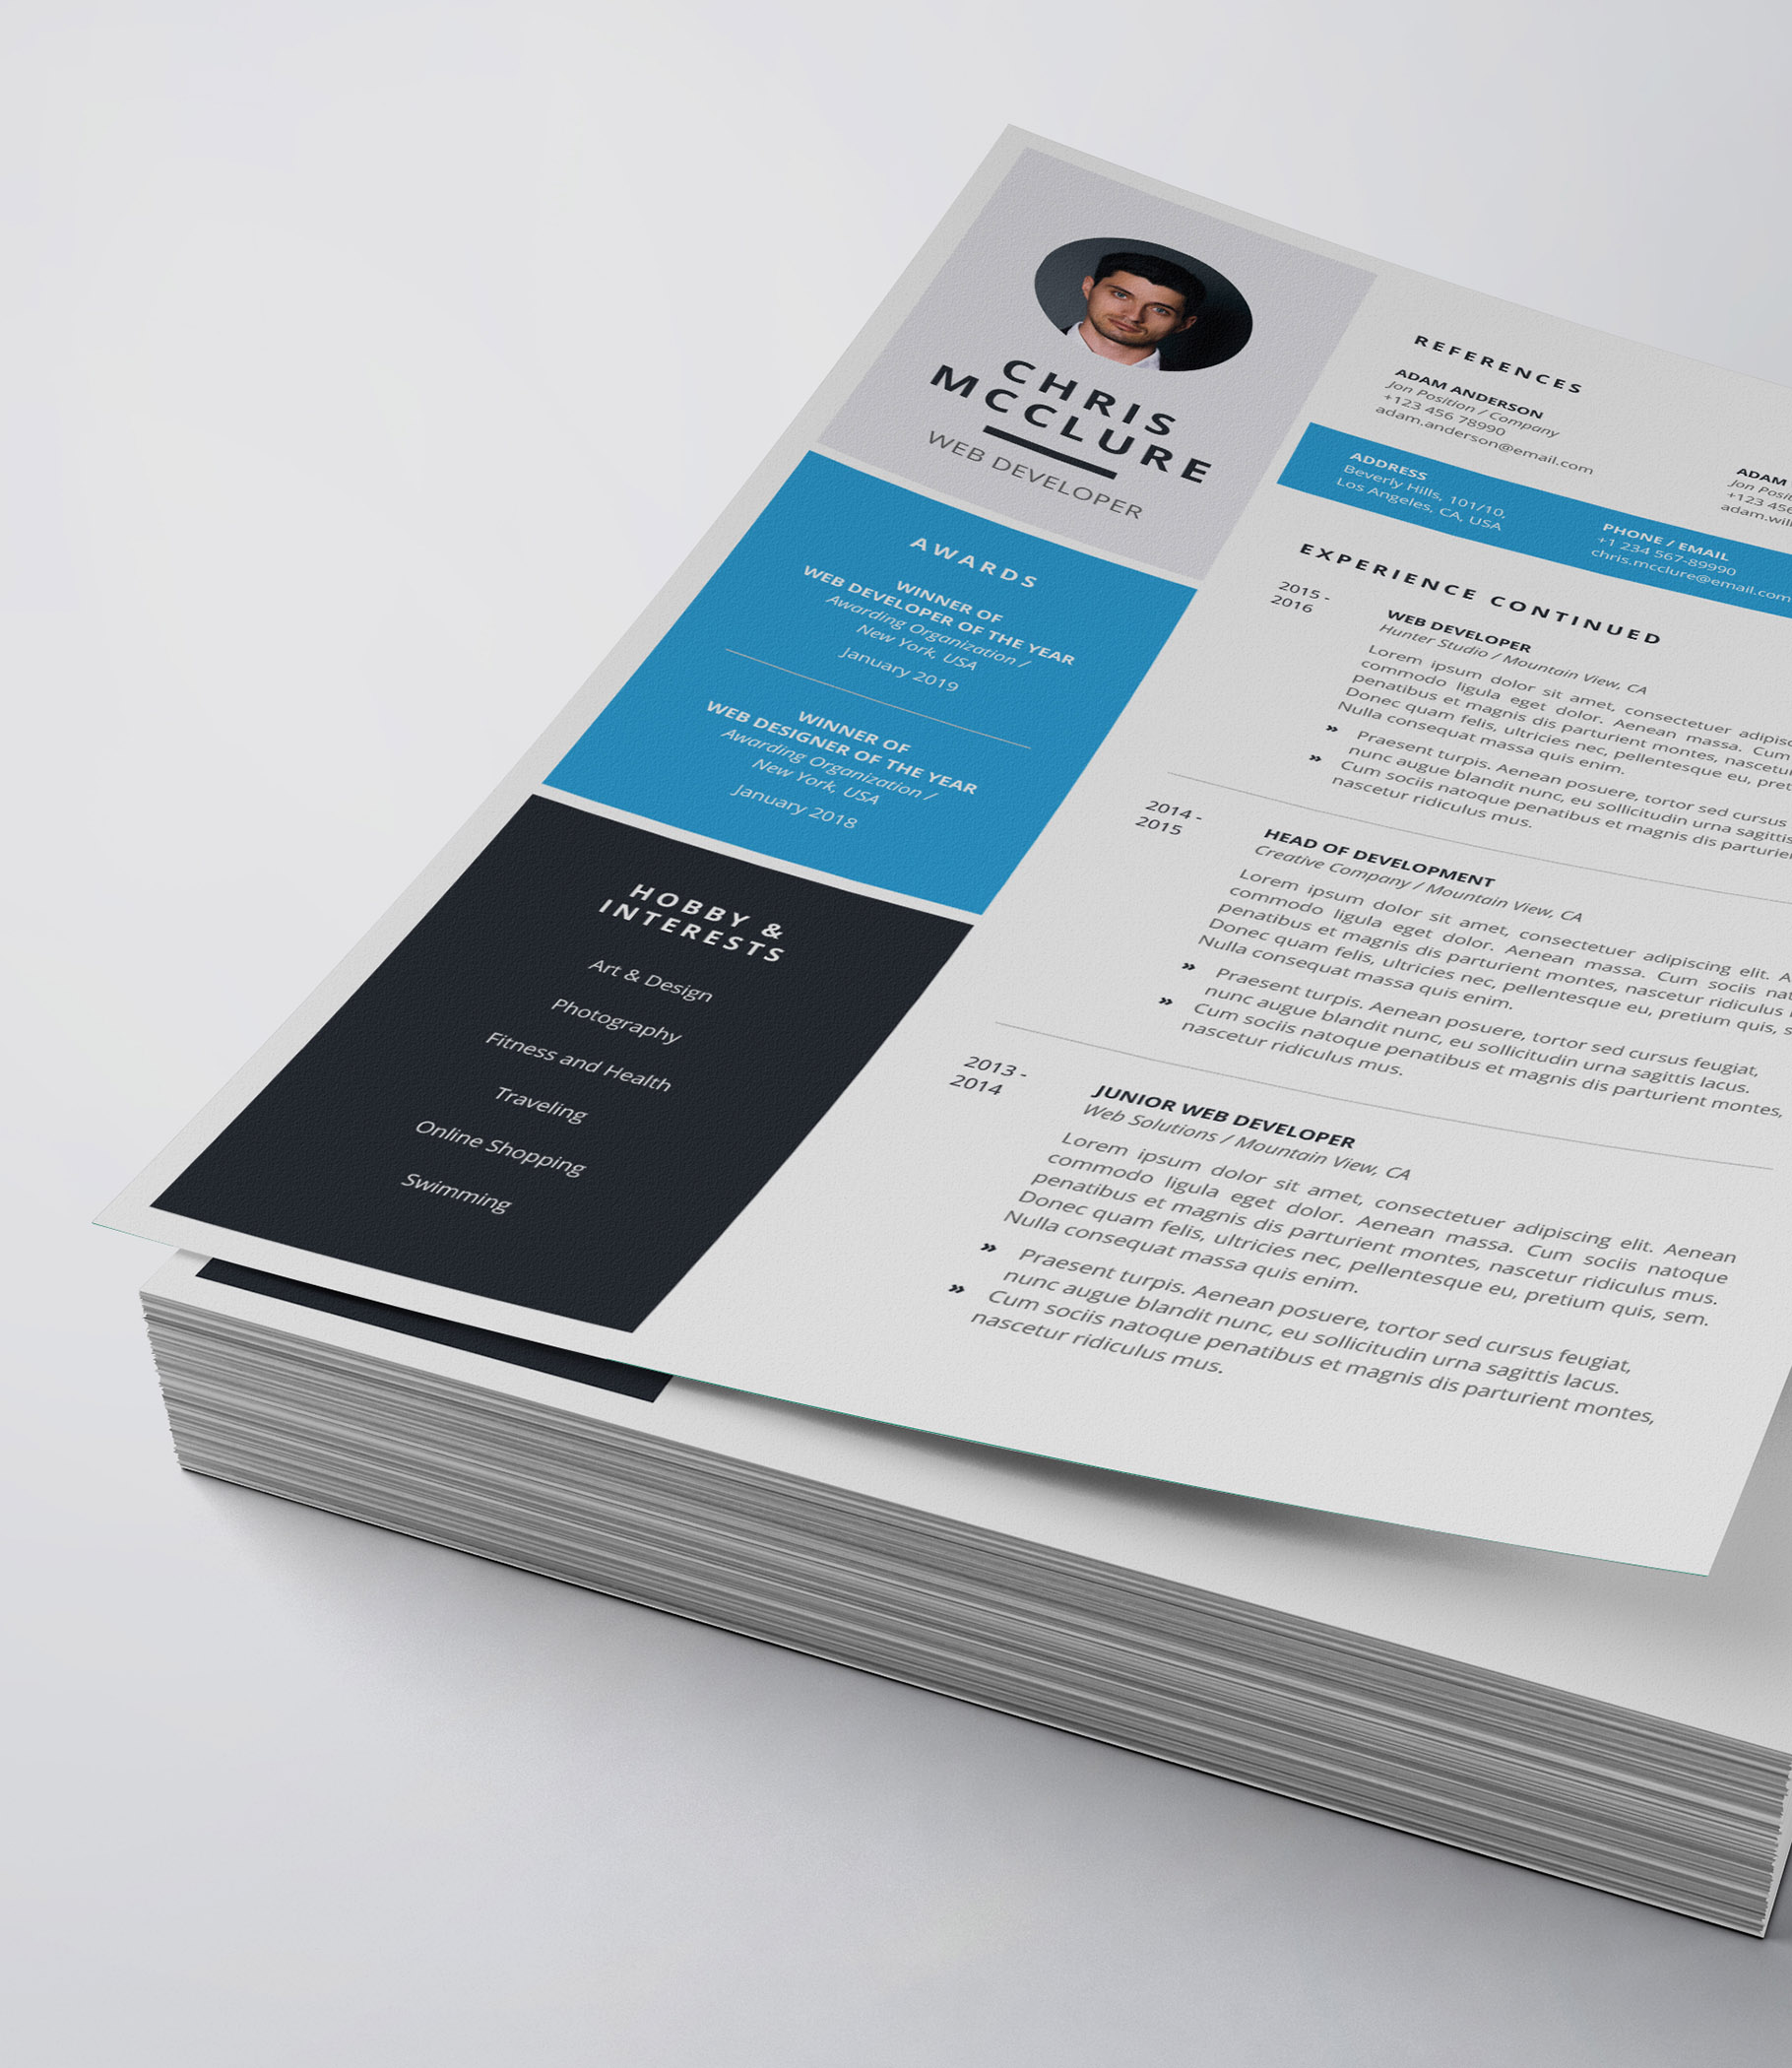 Professional resume template with a blue and black color scheme.